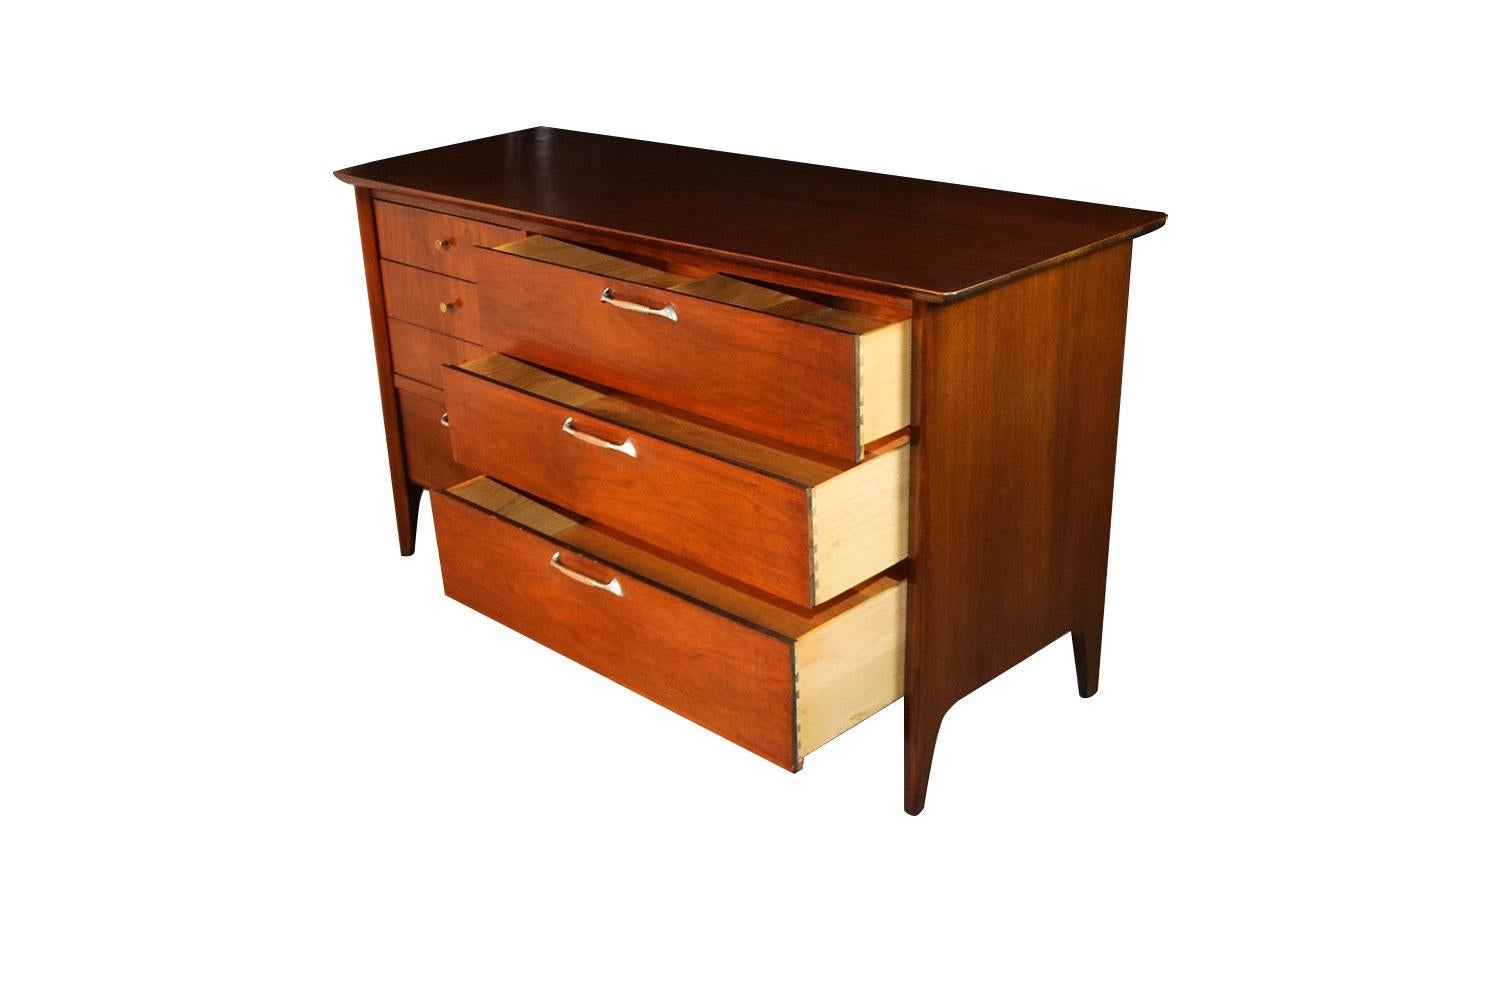 A gorgeous, walnut, midcentury, dresser in nearly pristine condition. Minimalist Danish modern inspired profile, with exceptional construction and style. Features six dovetailed drawers with brass pulls, and painted metal/steel handles, ample